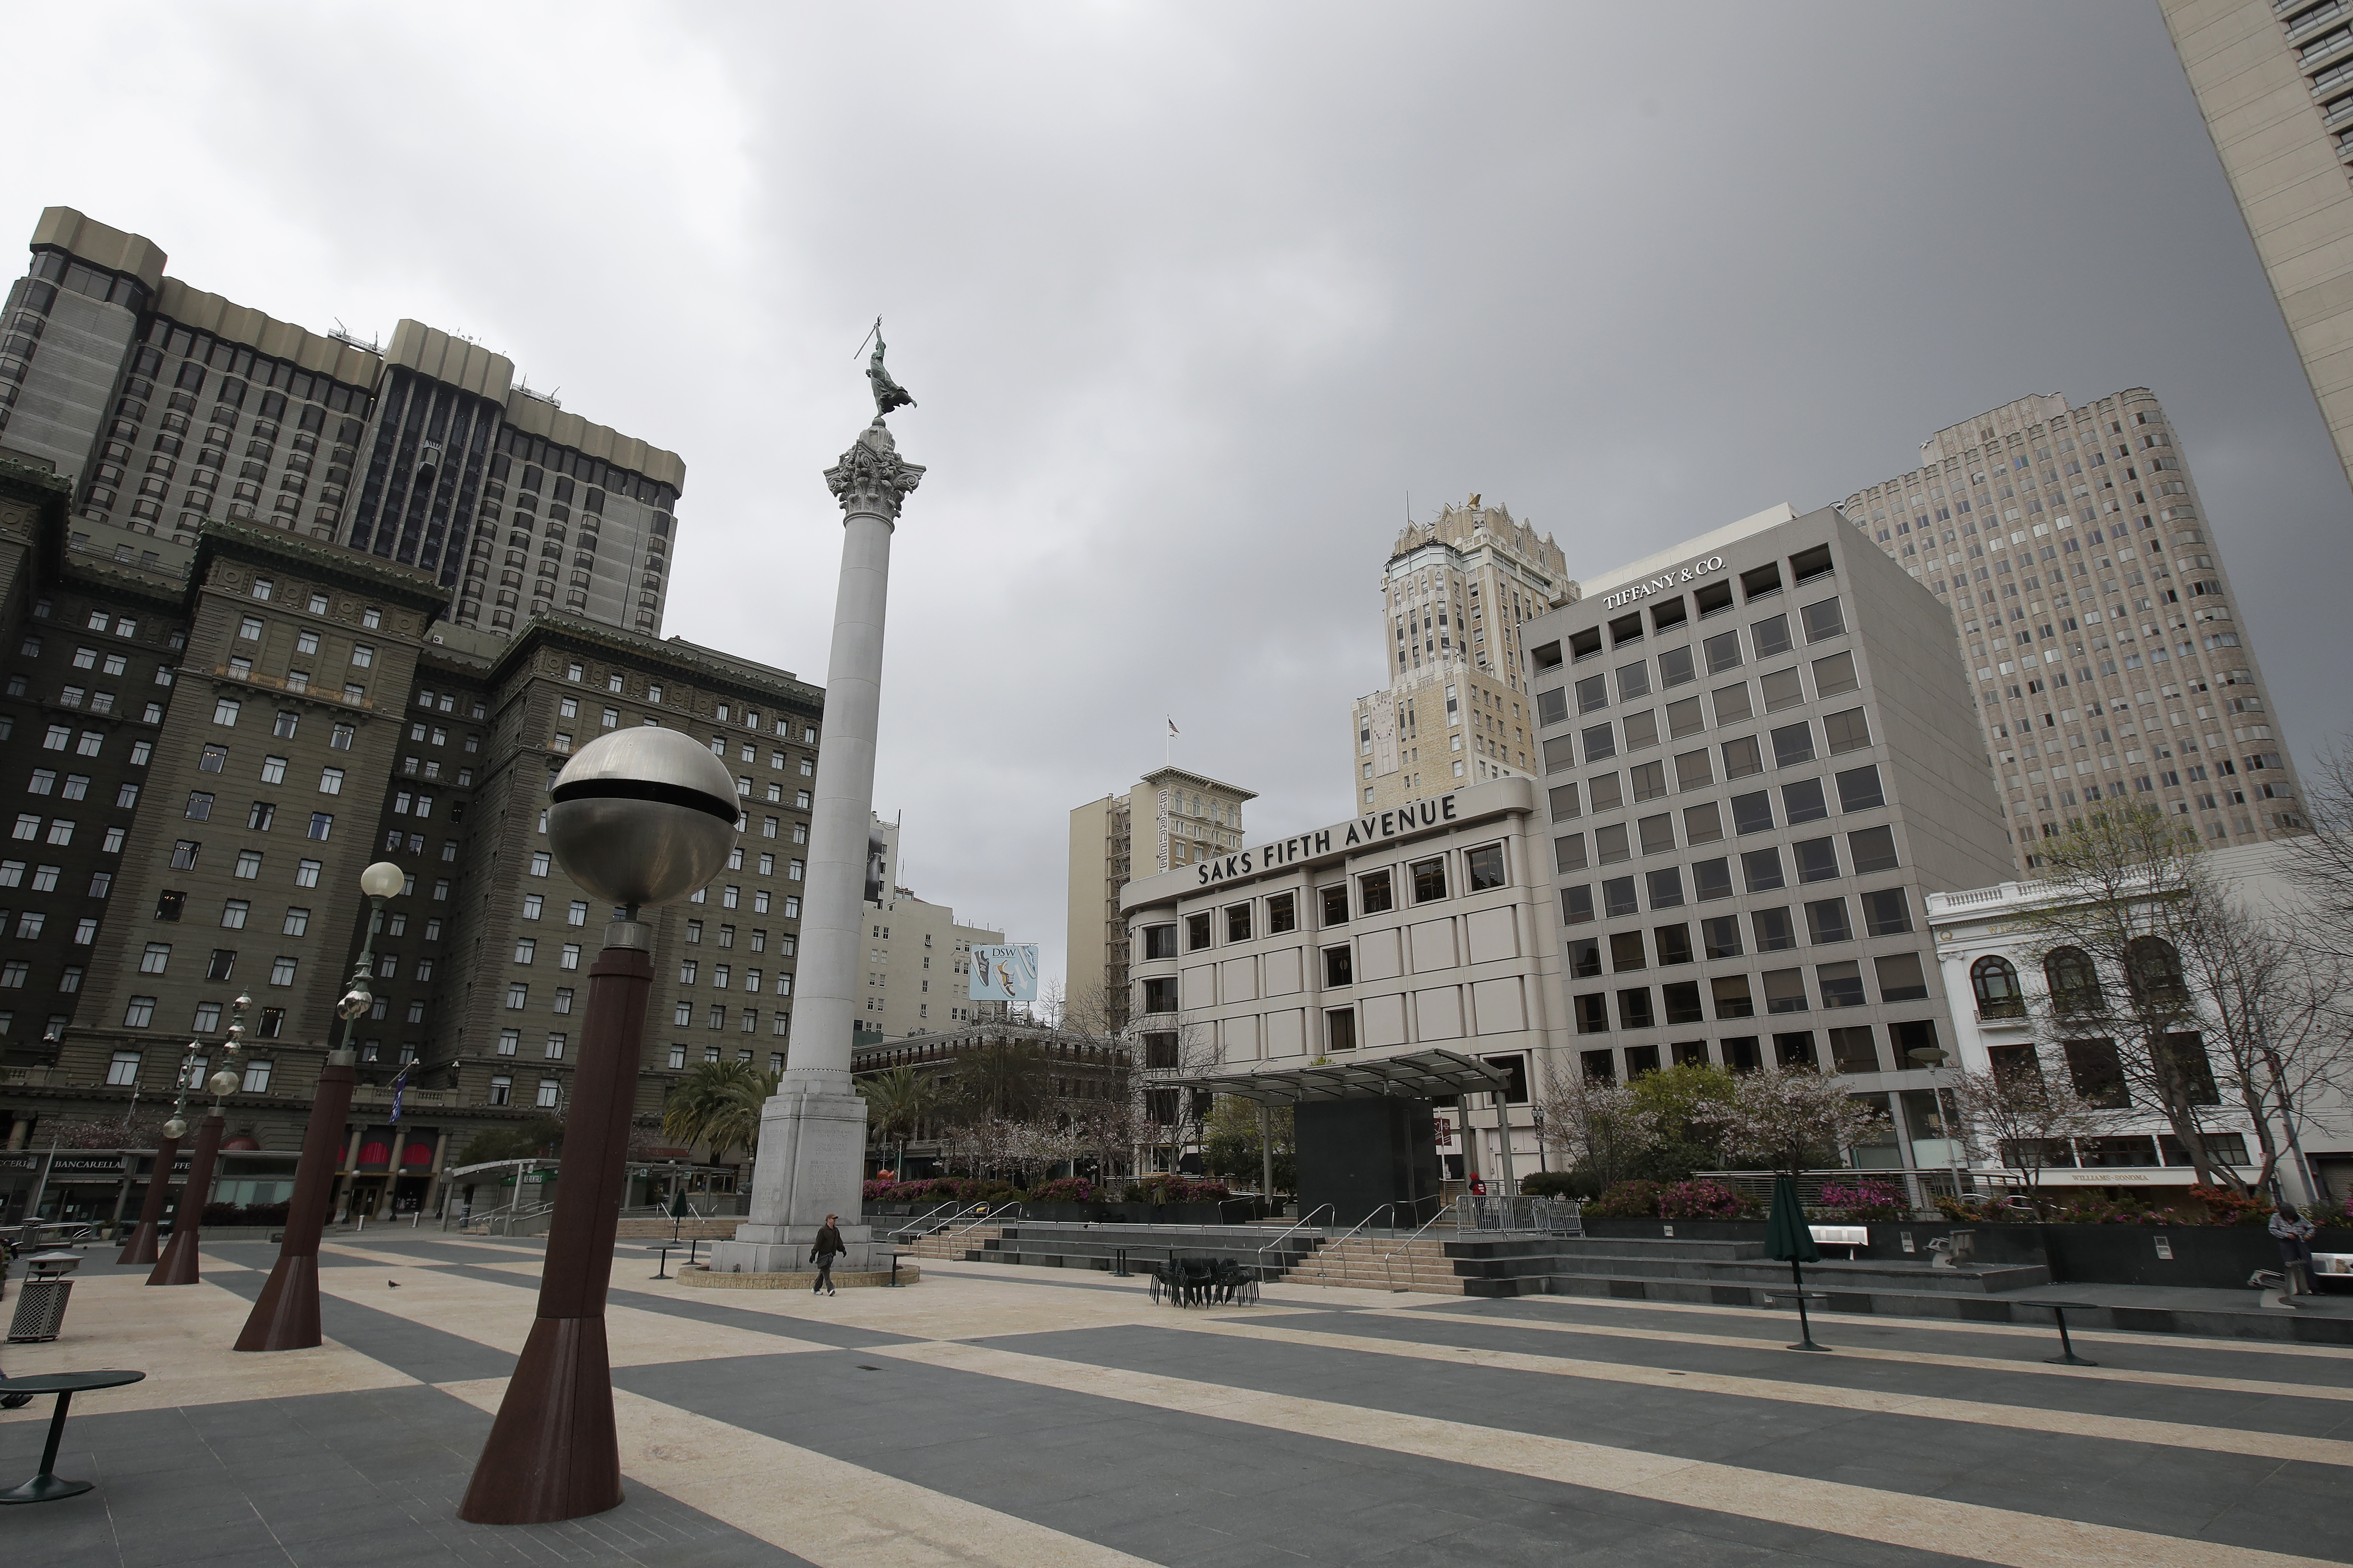 A pedestrian walks through a nearly empty Union Square in San Francisco, Sunday, March 29, 2020. Californians endured a weekend of stepped-up restrictions aimed at keeping them home as much as possible while hospitals and health officials scrambled Sunday to ready themselves for a week that could see the feared dramatic surge in coronavirus cases. (AP Photo/Jeff Chiu)